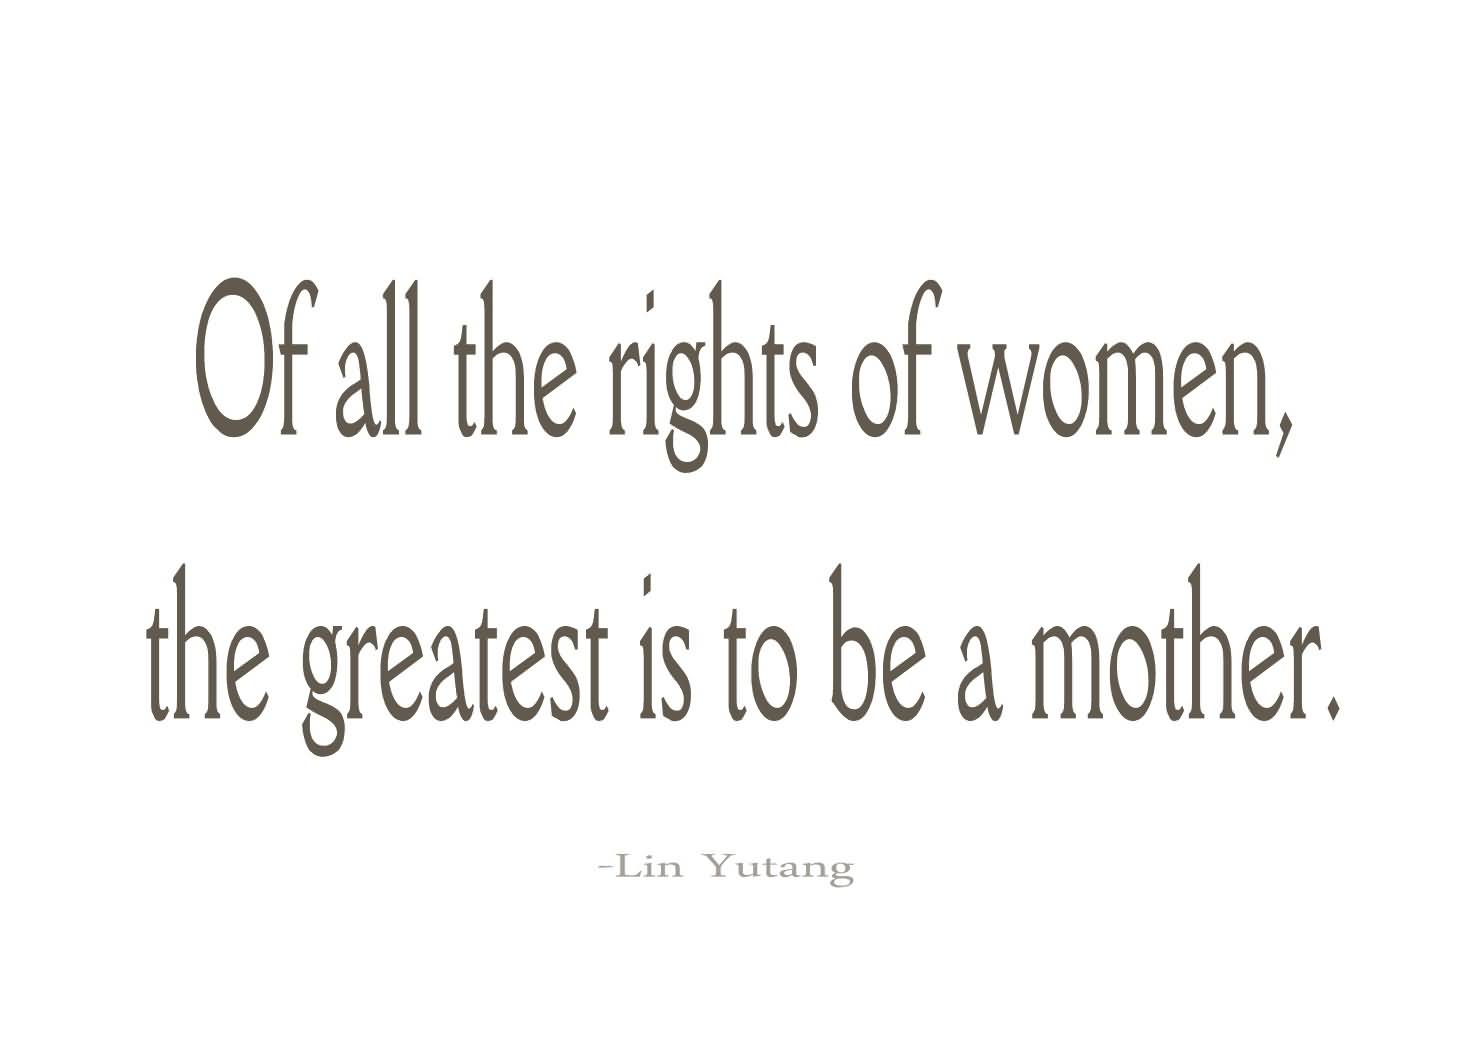 Of all the rights of woman, the greatest is to be a mother. Lin Yutang